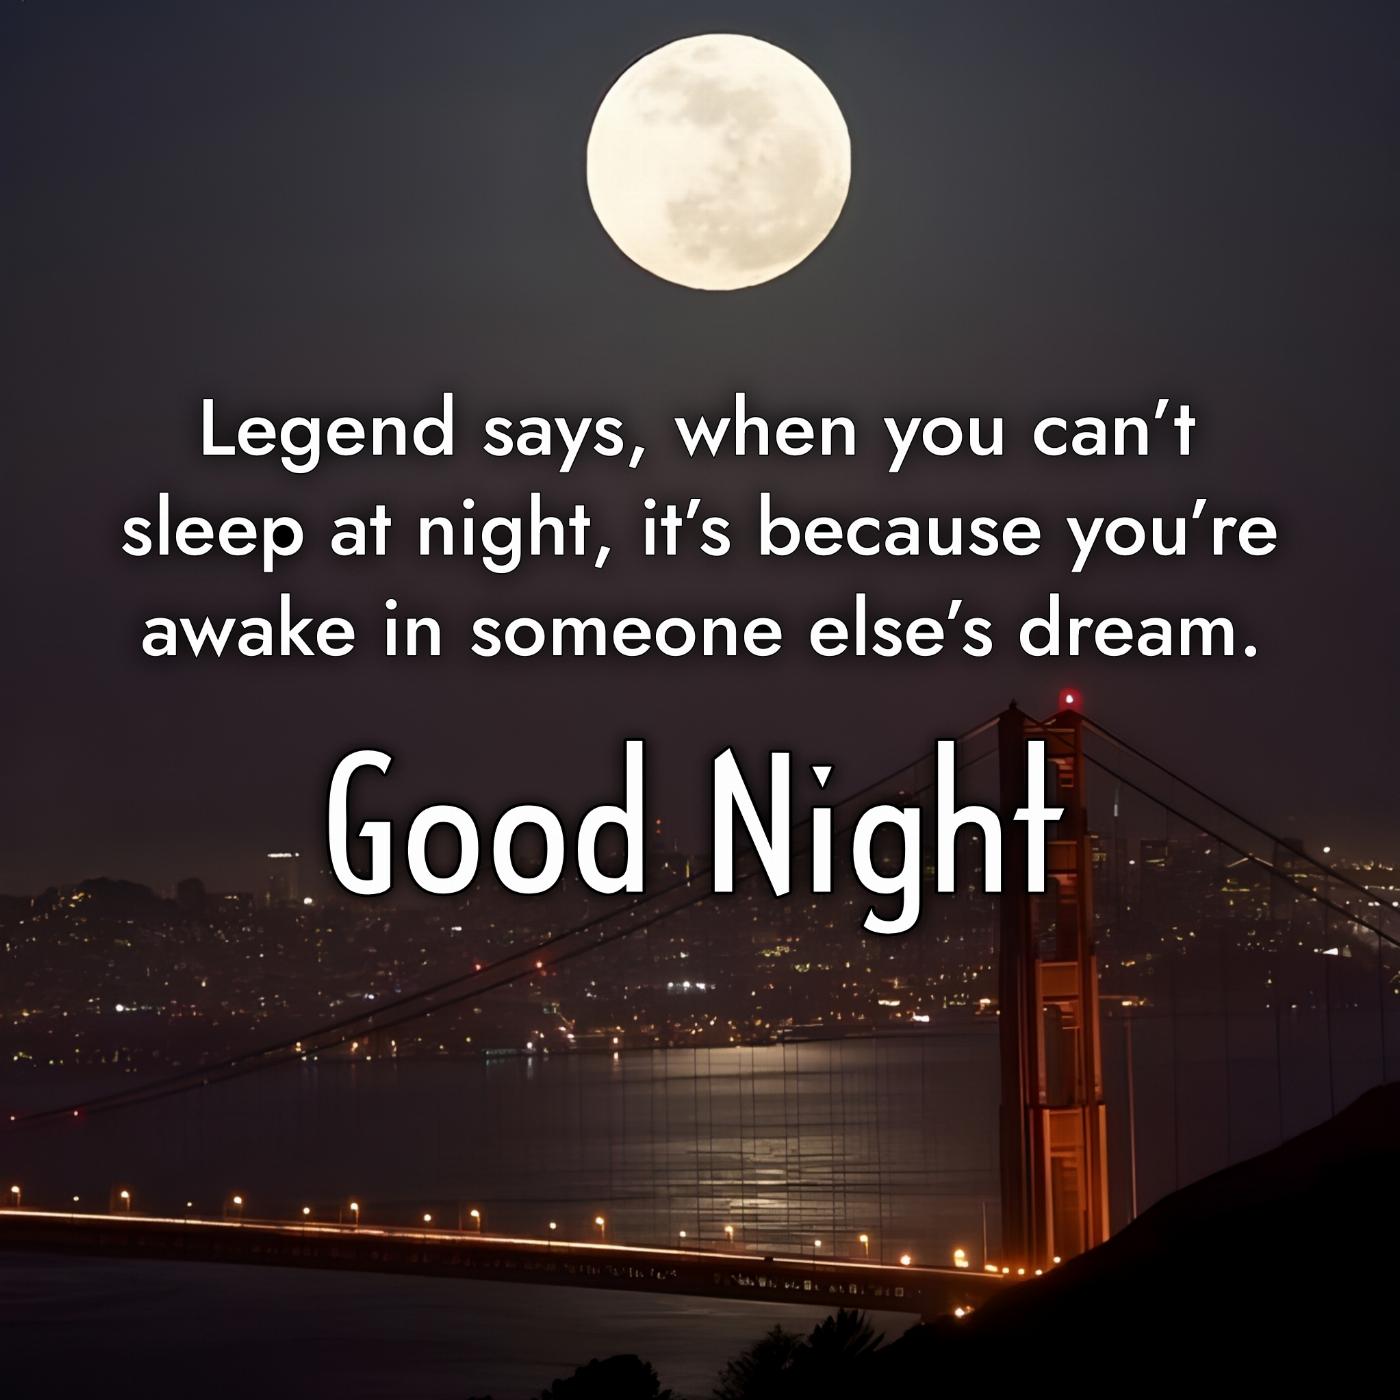 Legend says when you cant sleep at night